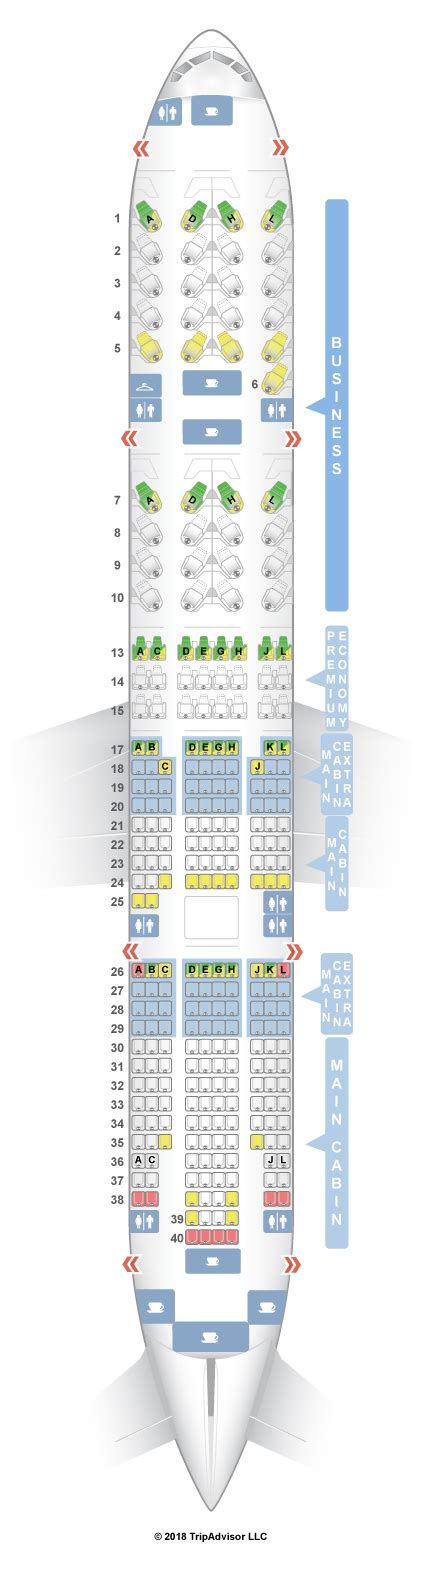 boeing 777 seat map american